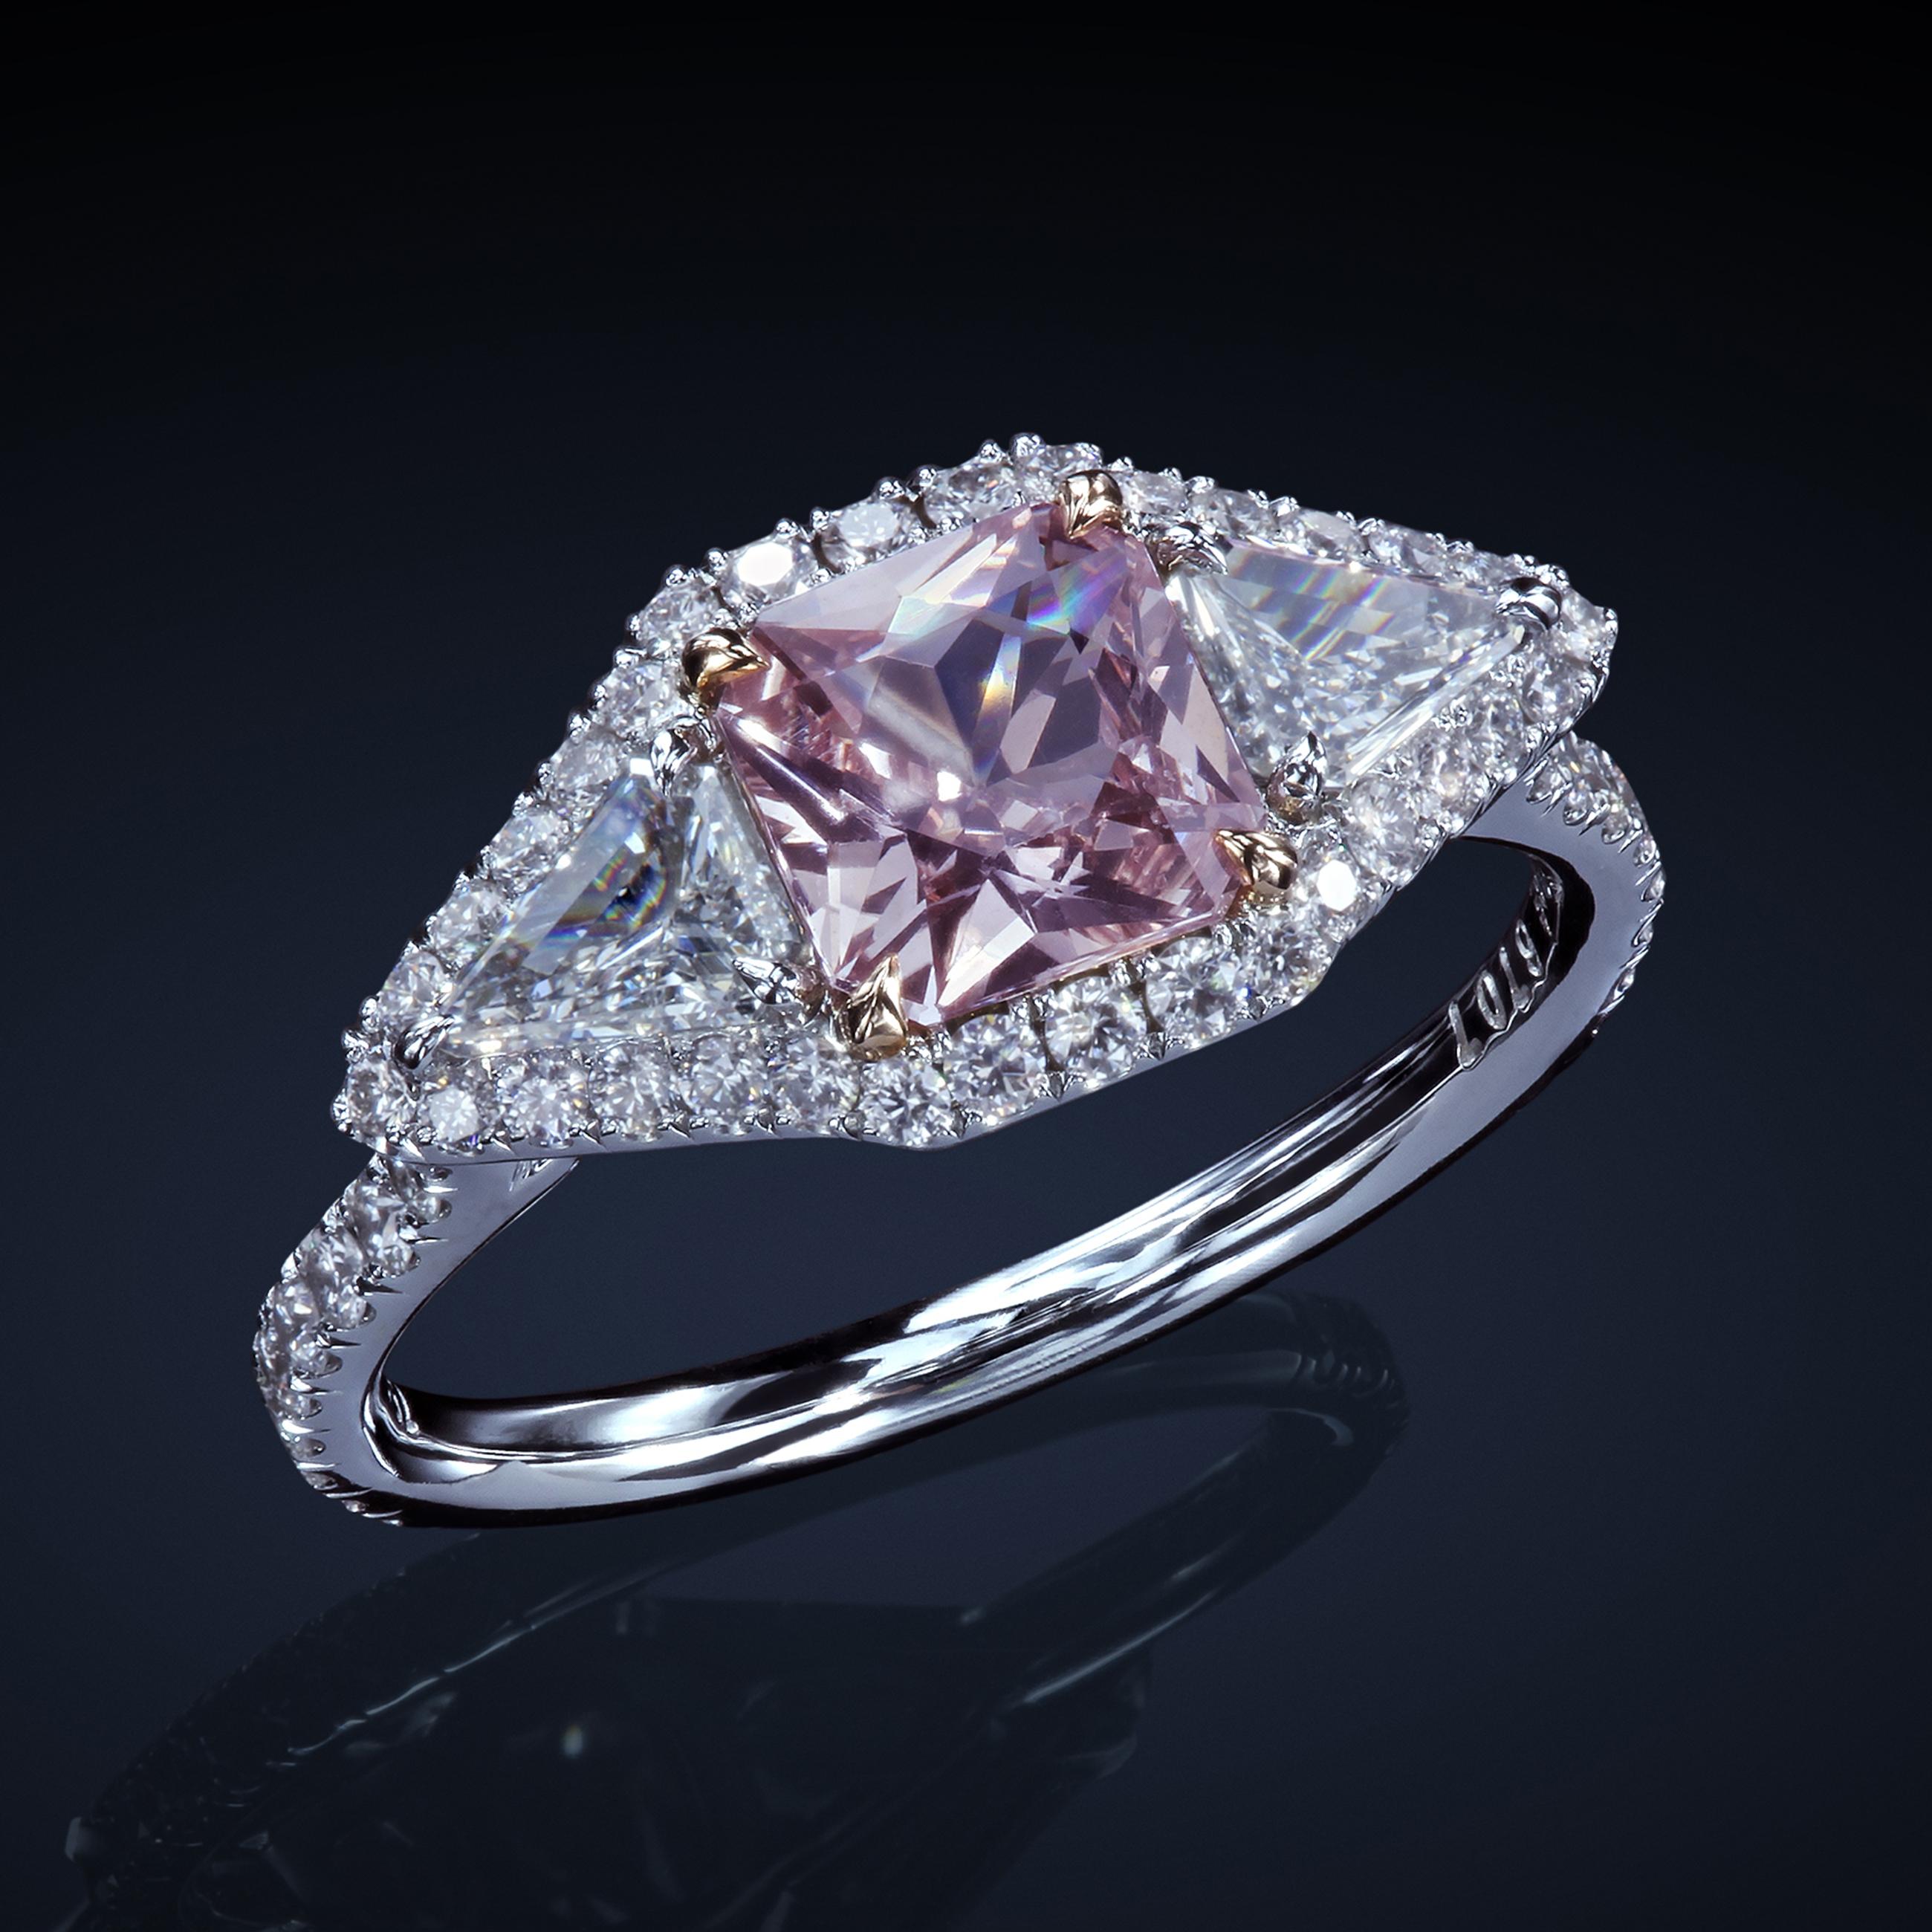 Contemporary Leon Mege Montpassier Style Platinum Diamond Ring with a Natural Pink Sapphire For Sale